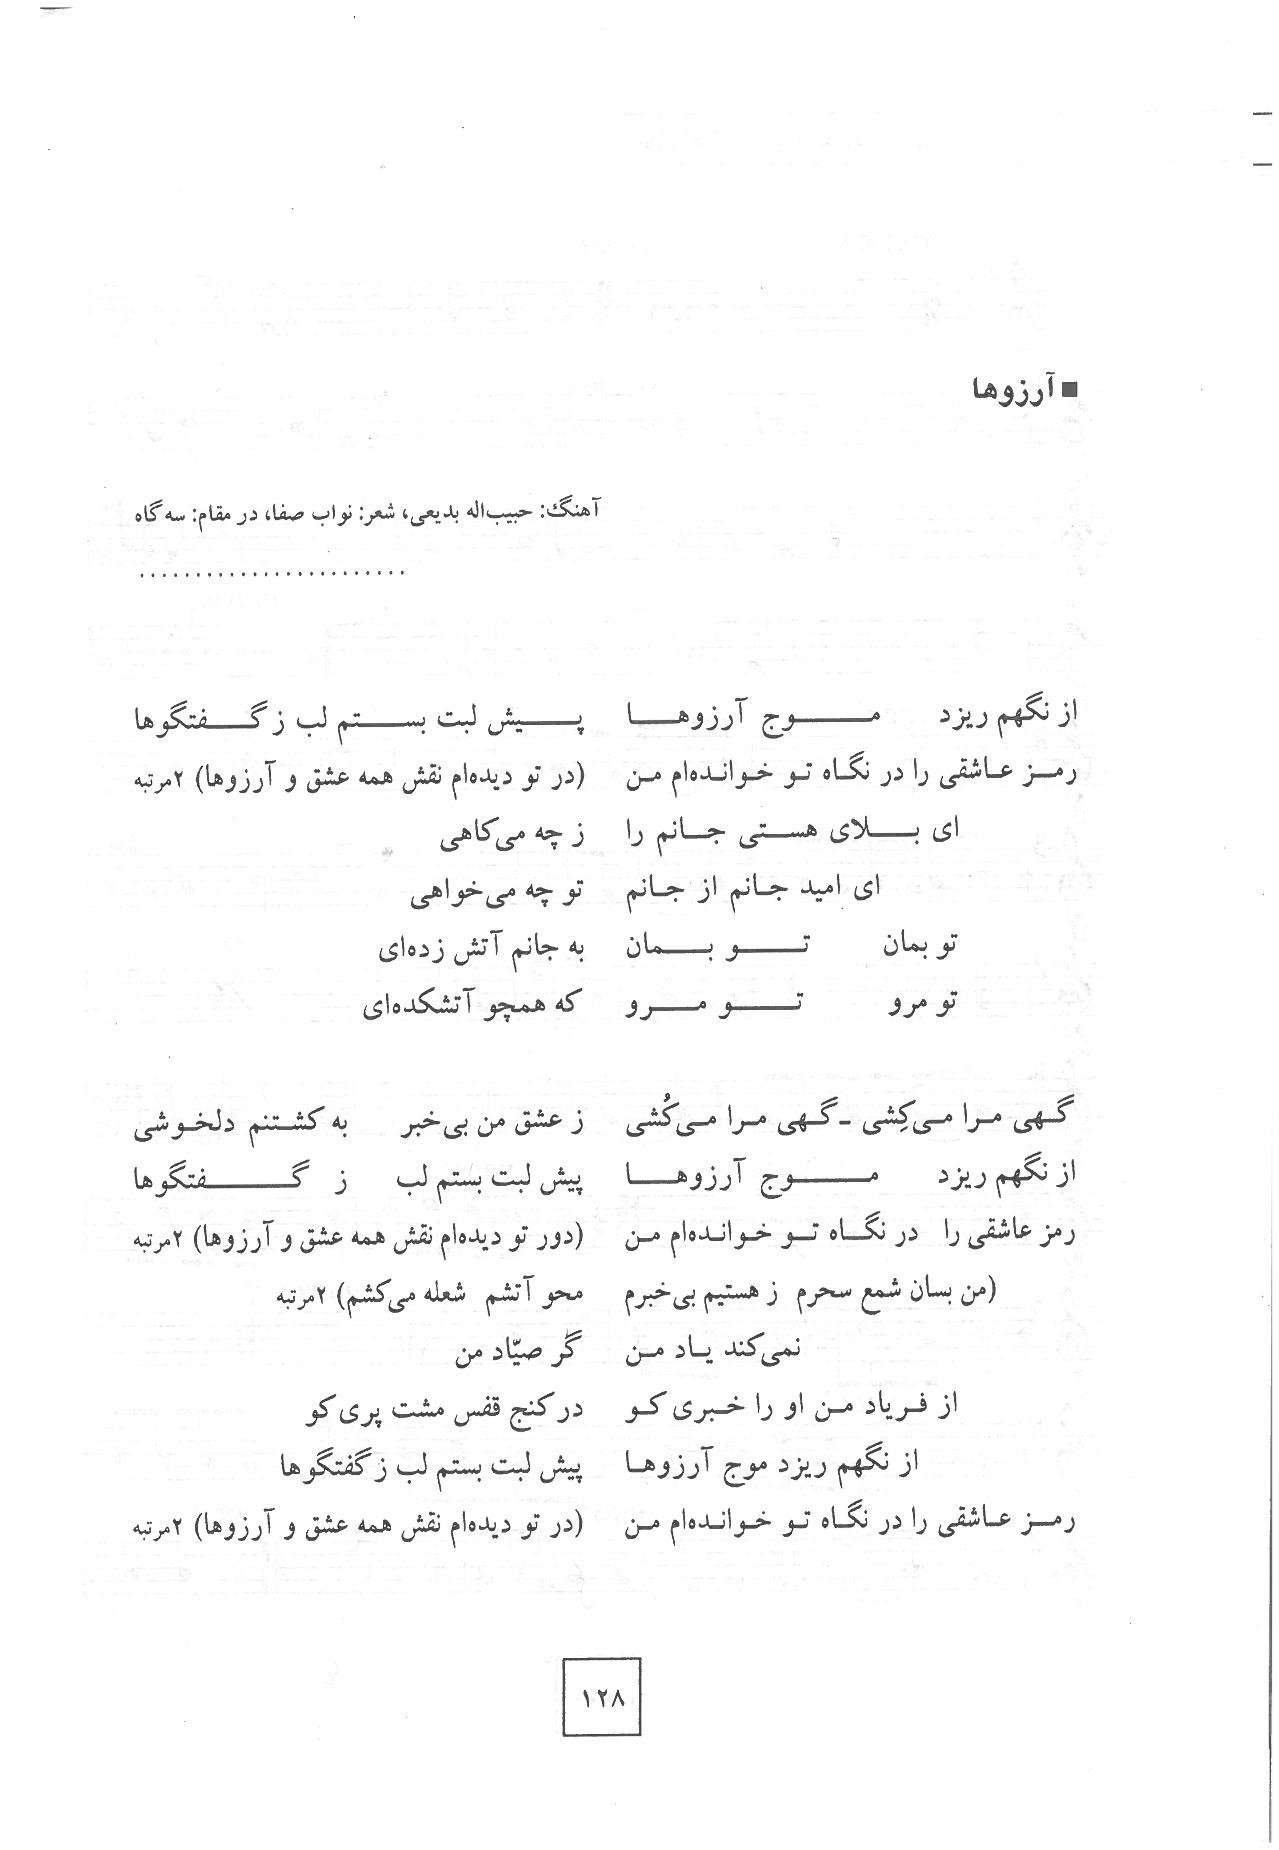 A page of arabic writing with some words in it